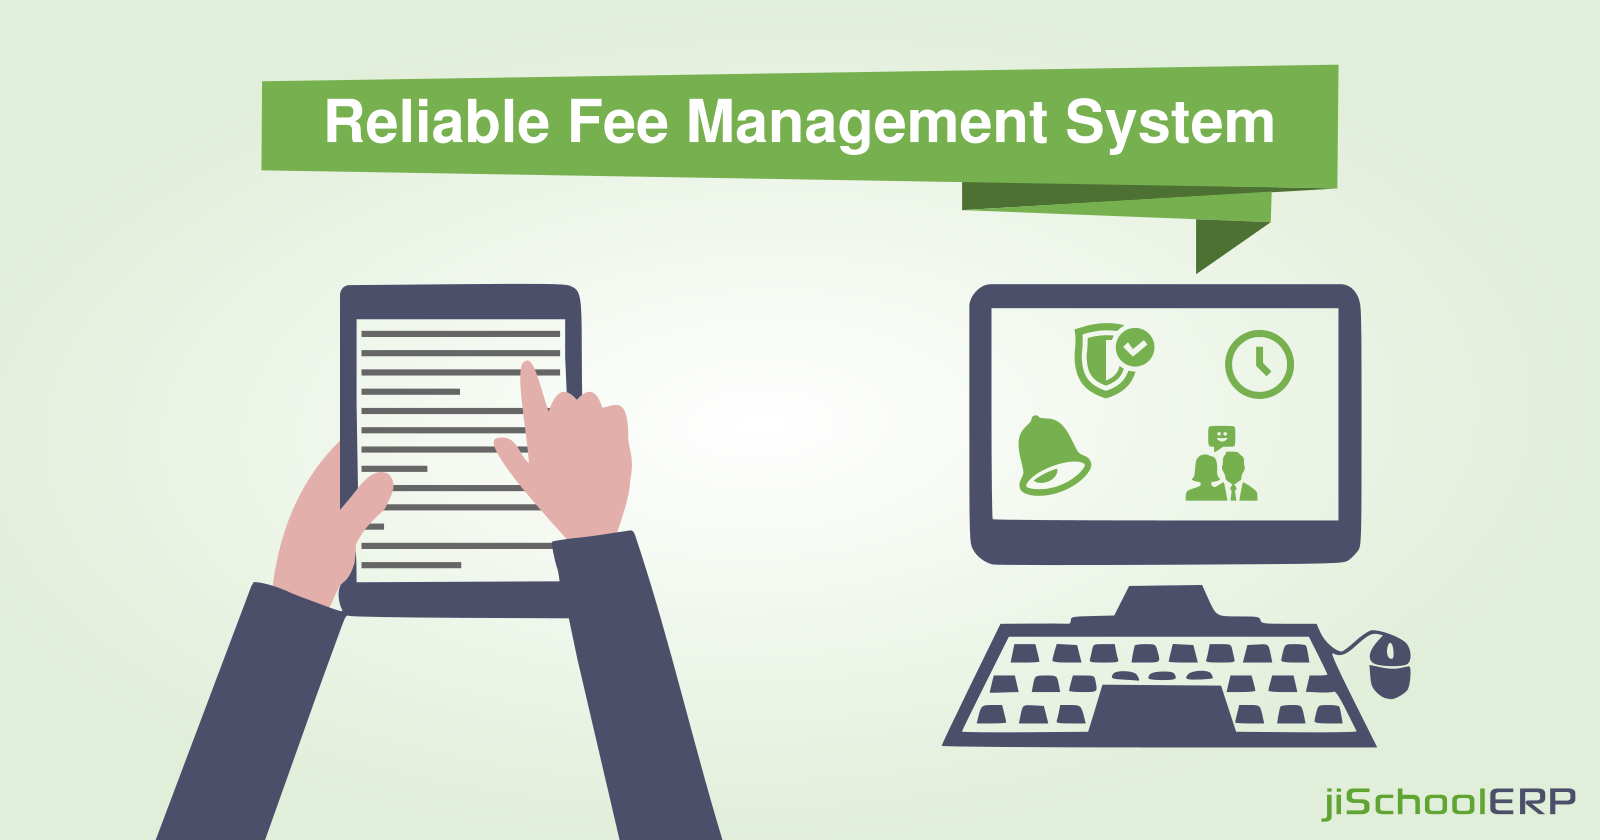 Simplifying the Fee Management System for Your School